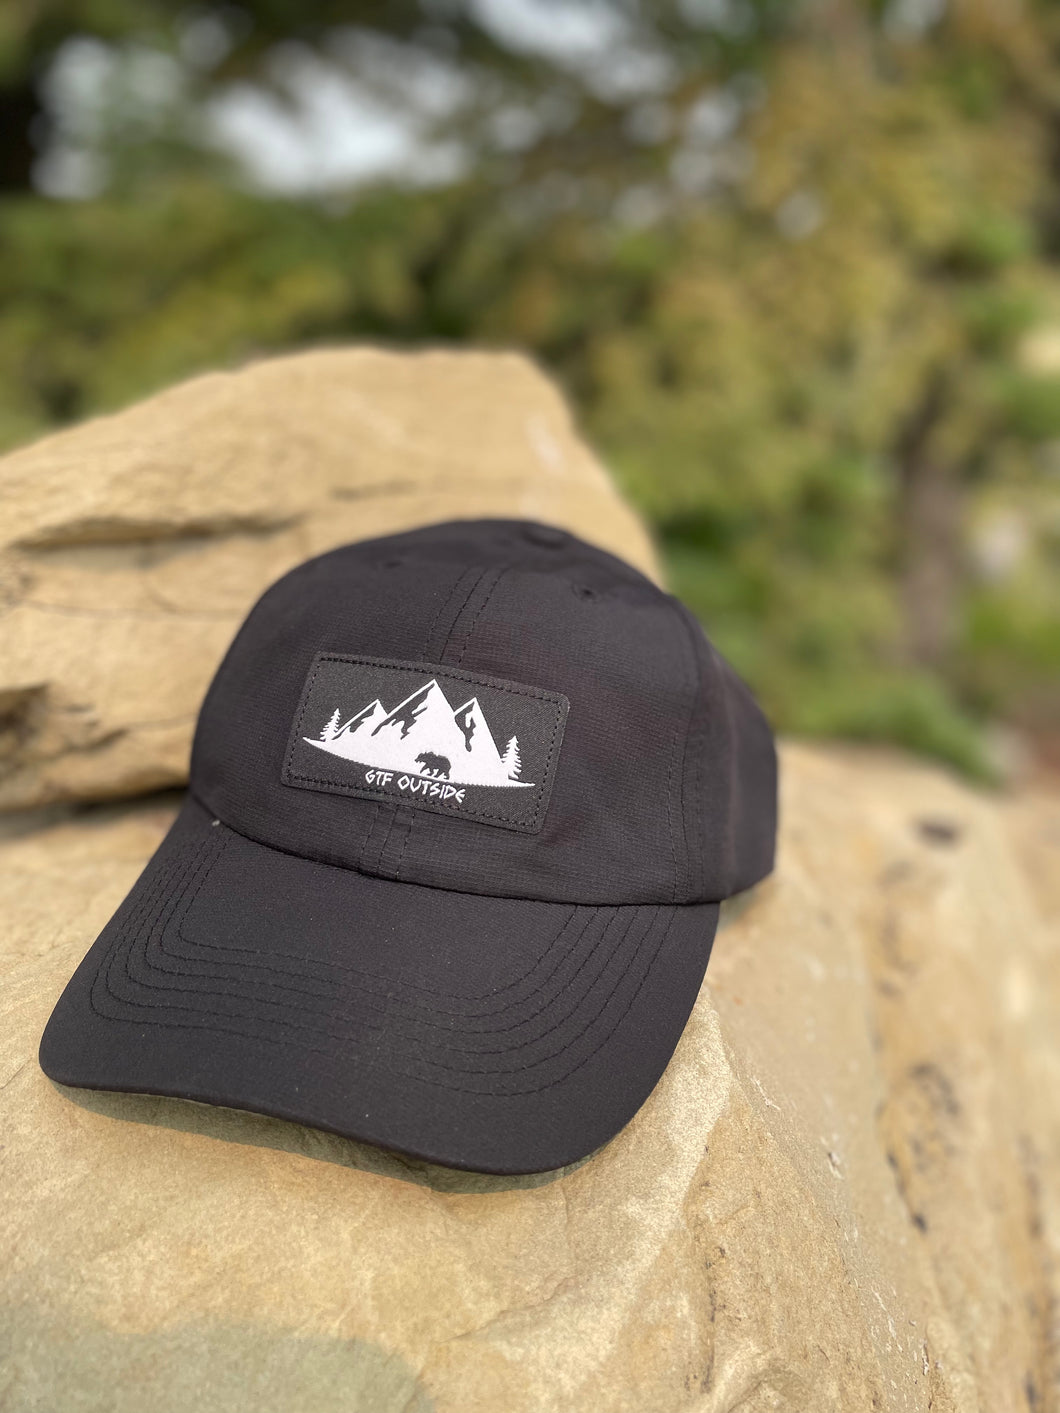 black athletic hat with black and white gtf outside logo. gtfo. logo with bear, trees and mountains